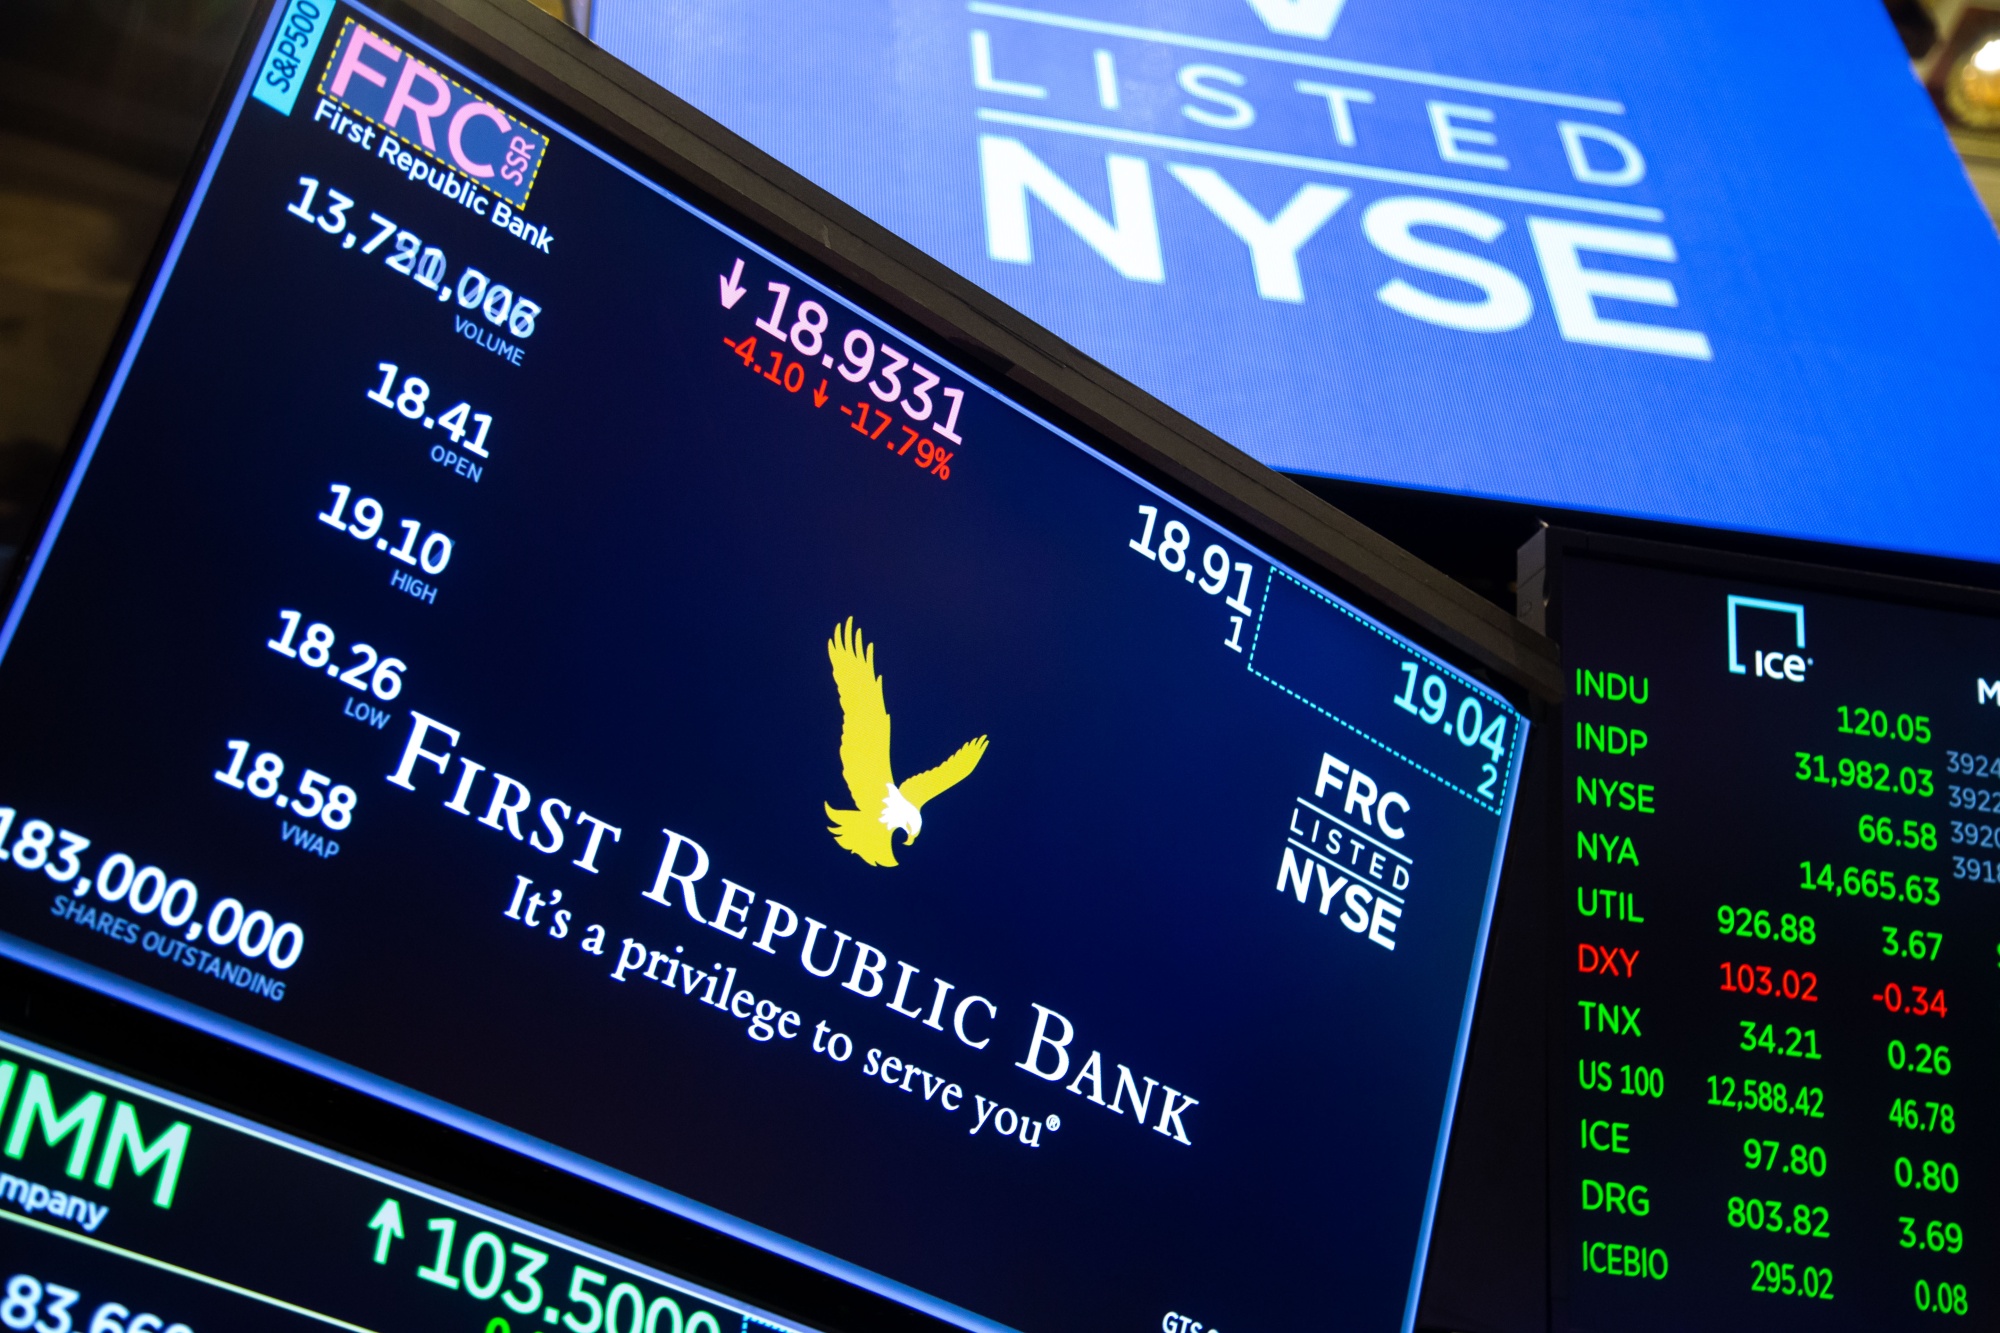 First Republic Bank Short Sellers Struggle to Find Stock to Bet Against